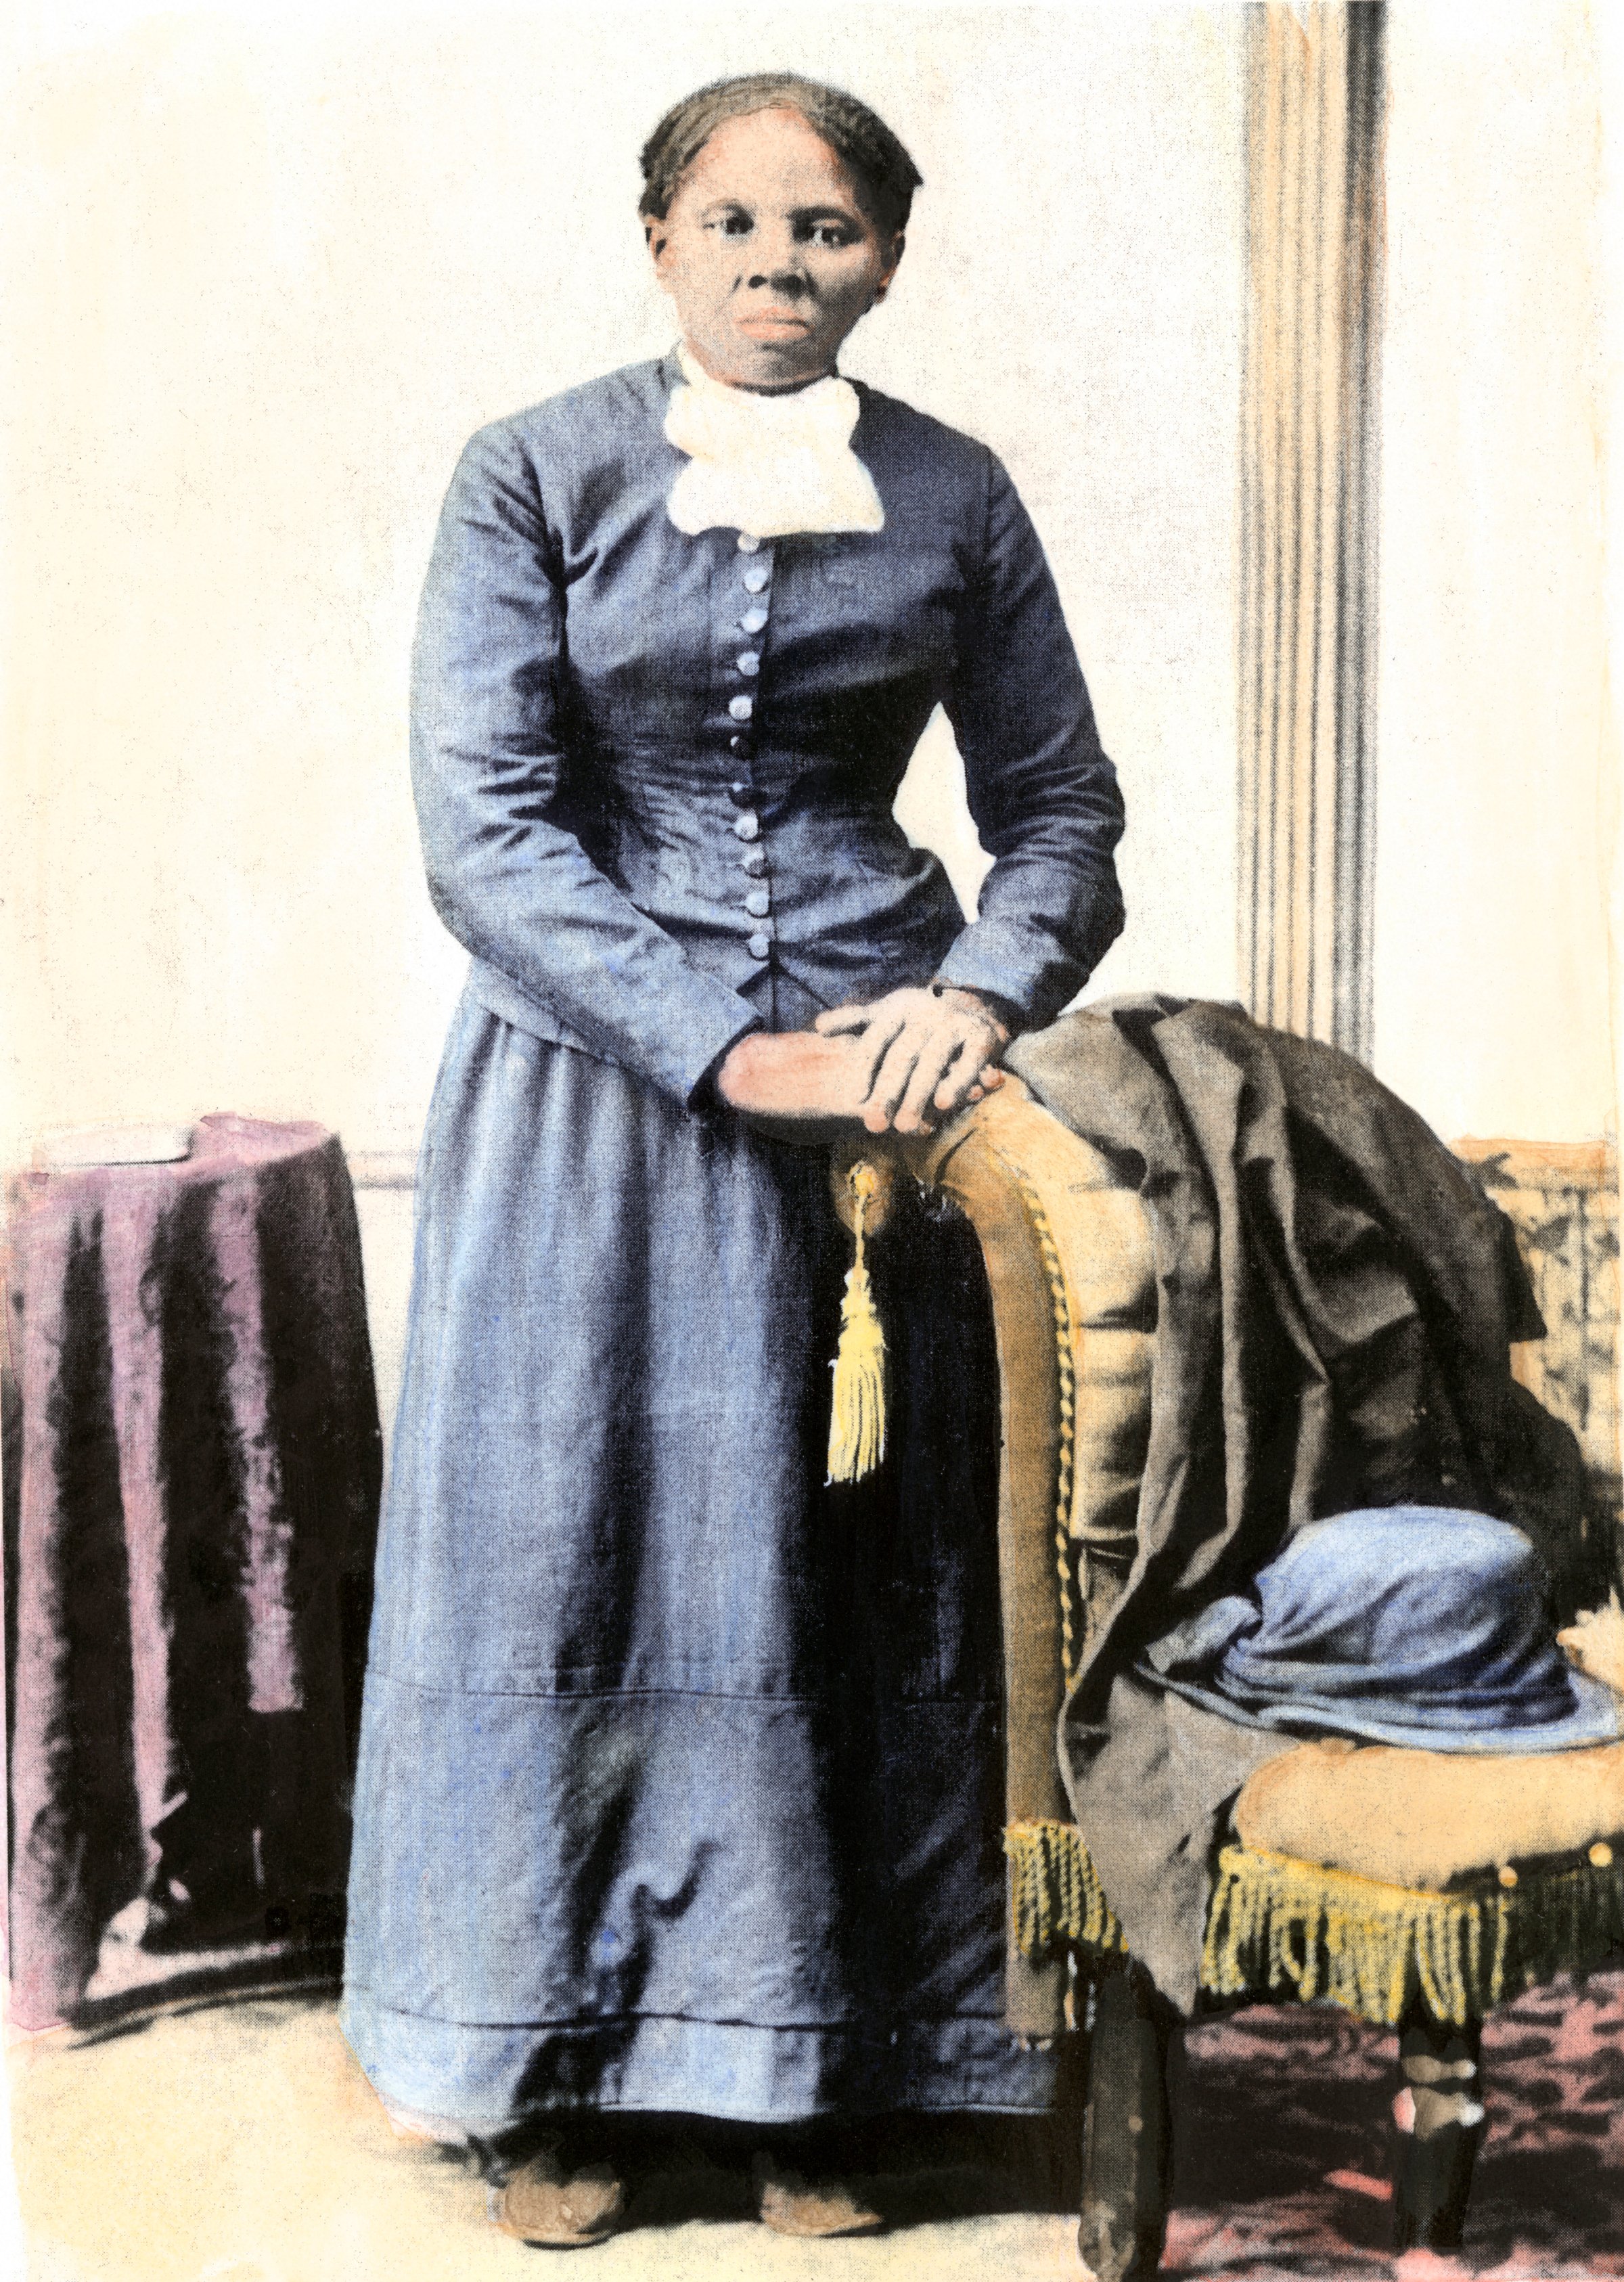 American abolitionist Harriet Tubman (1820 - 1913) escaped slavery and went on to lead the Underground Railroad.